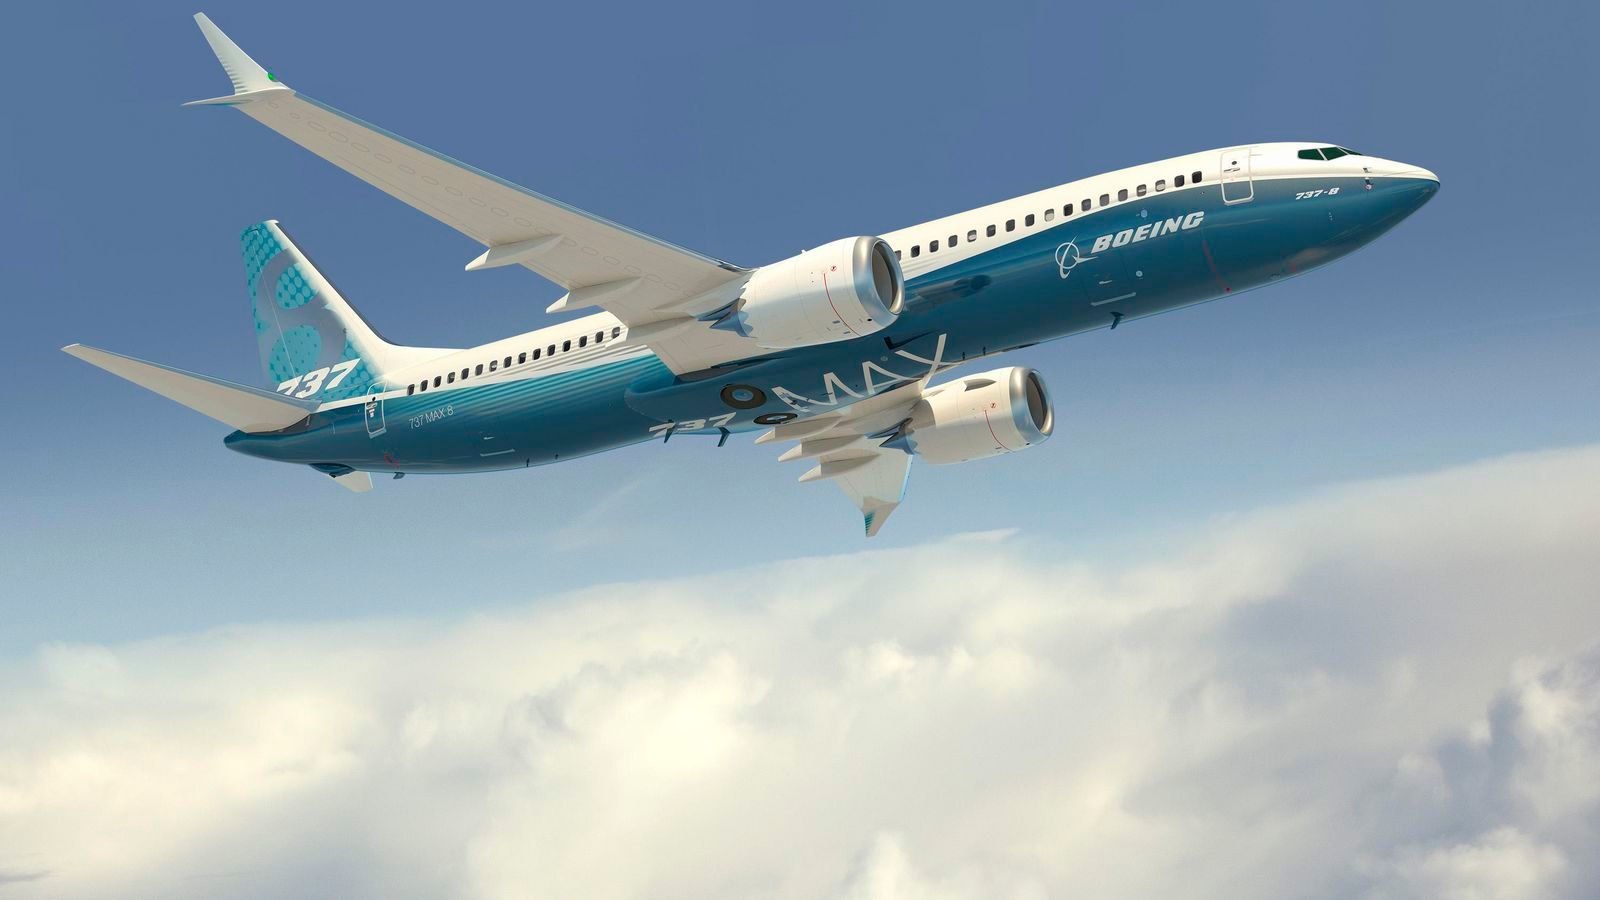 Illustration for article titled 737 MAX Analysis from Forbes: Boeings Market Position Insulated